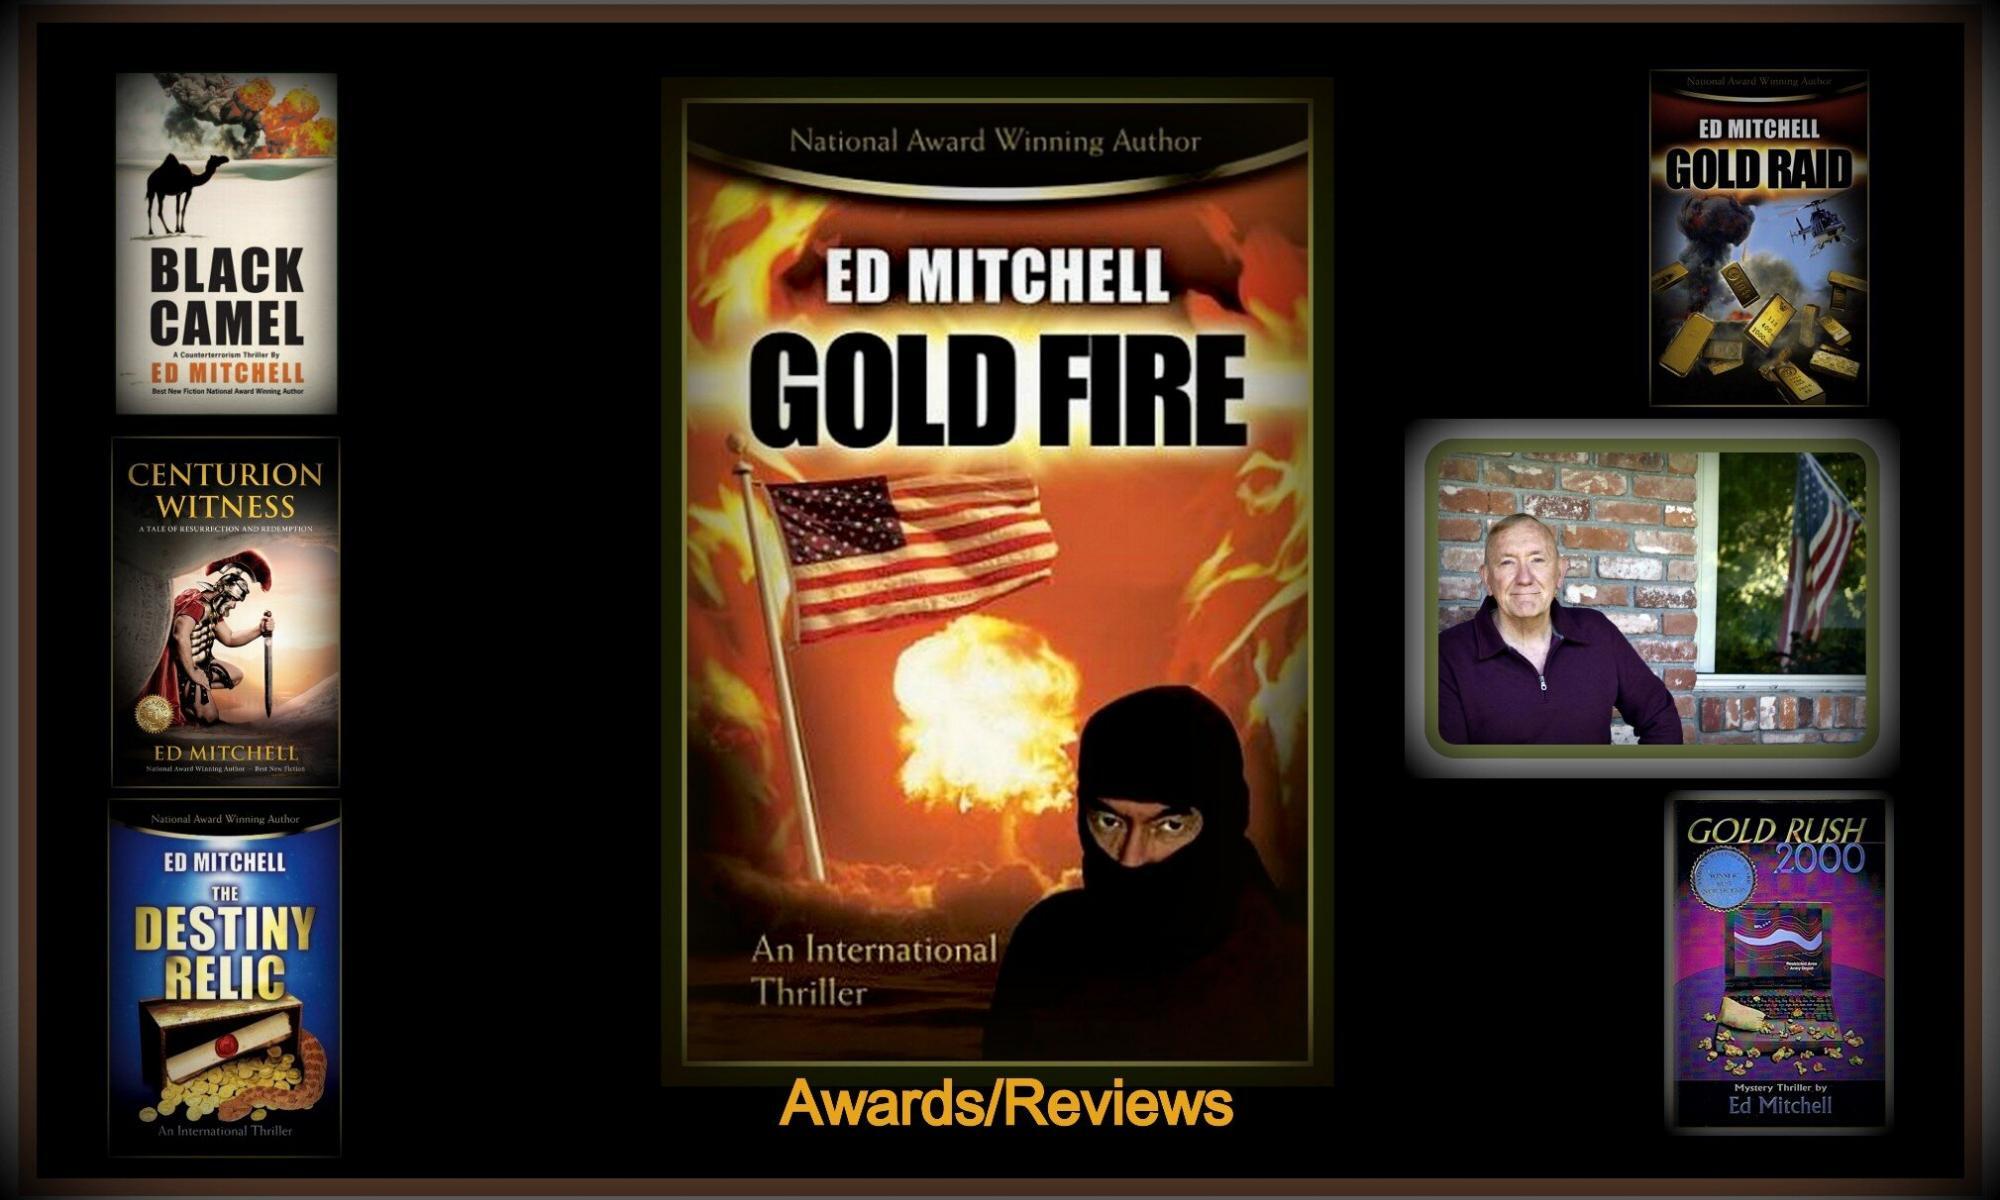 The book Gold Fire and all its Awards and Reviews a perfect 5.0